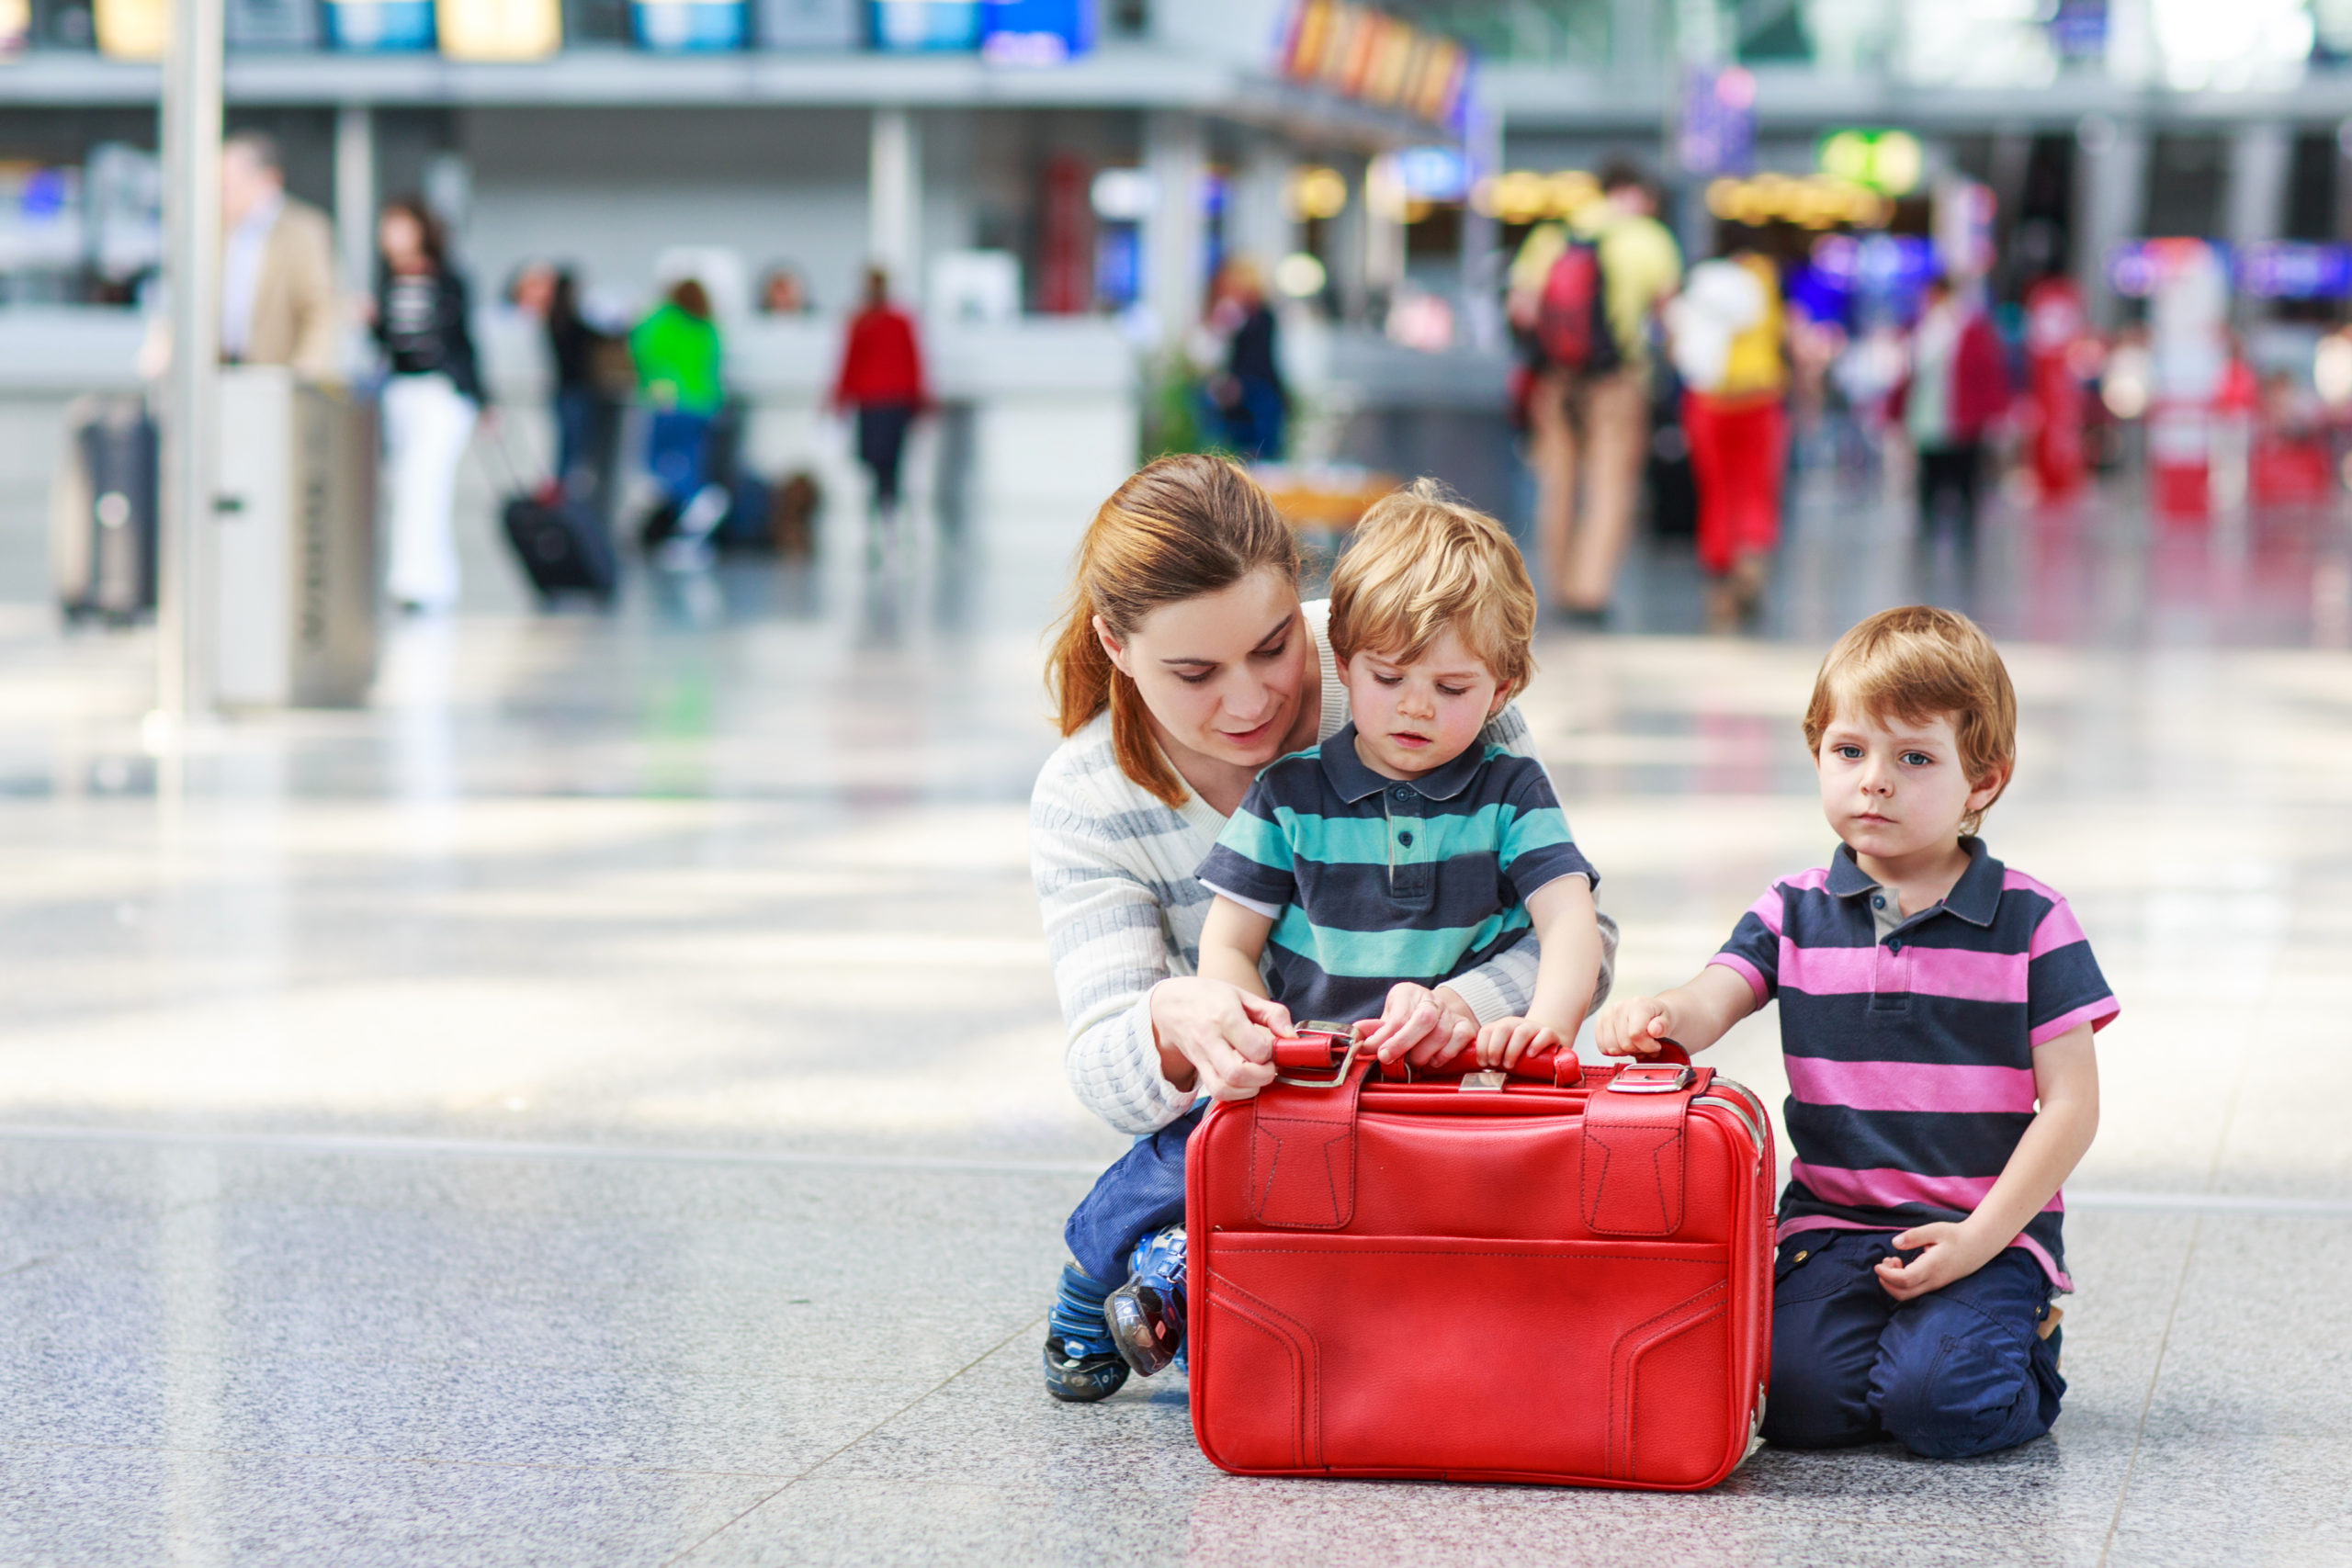 Can I stop my children going on holiday with my ex’s new partner?